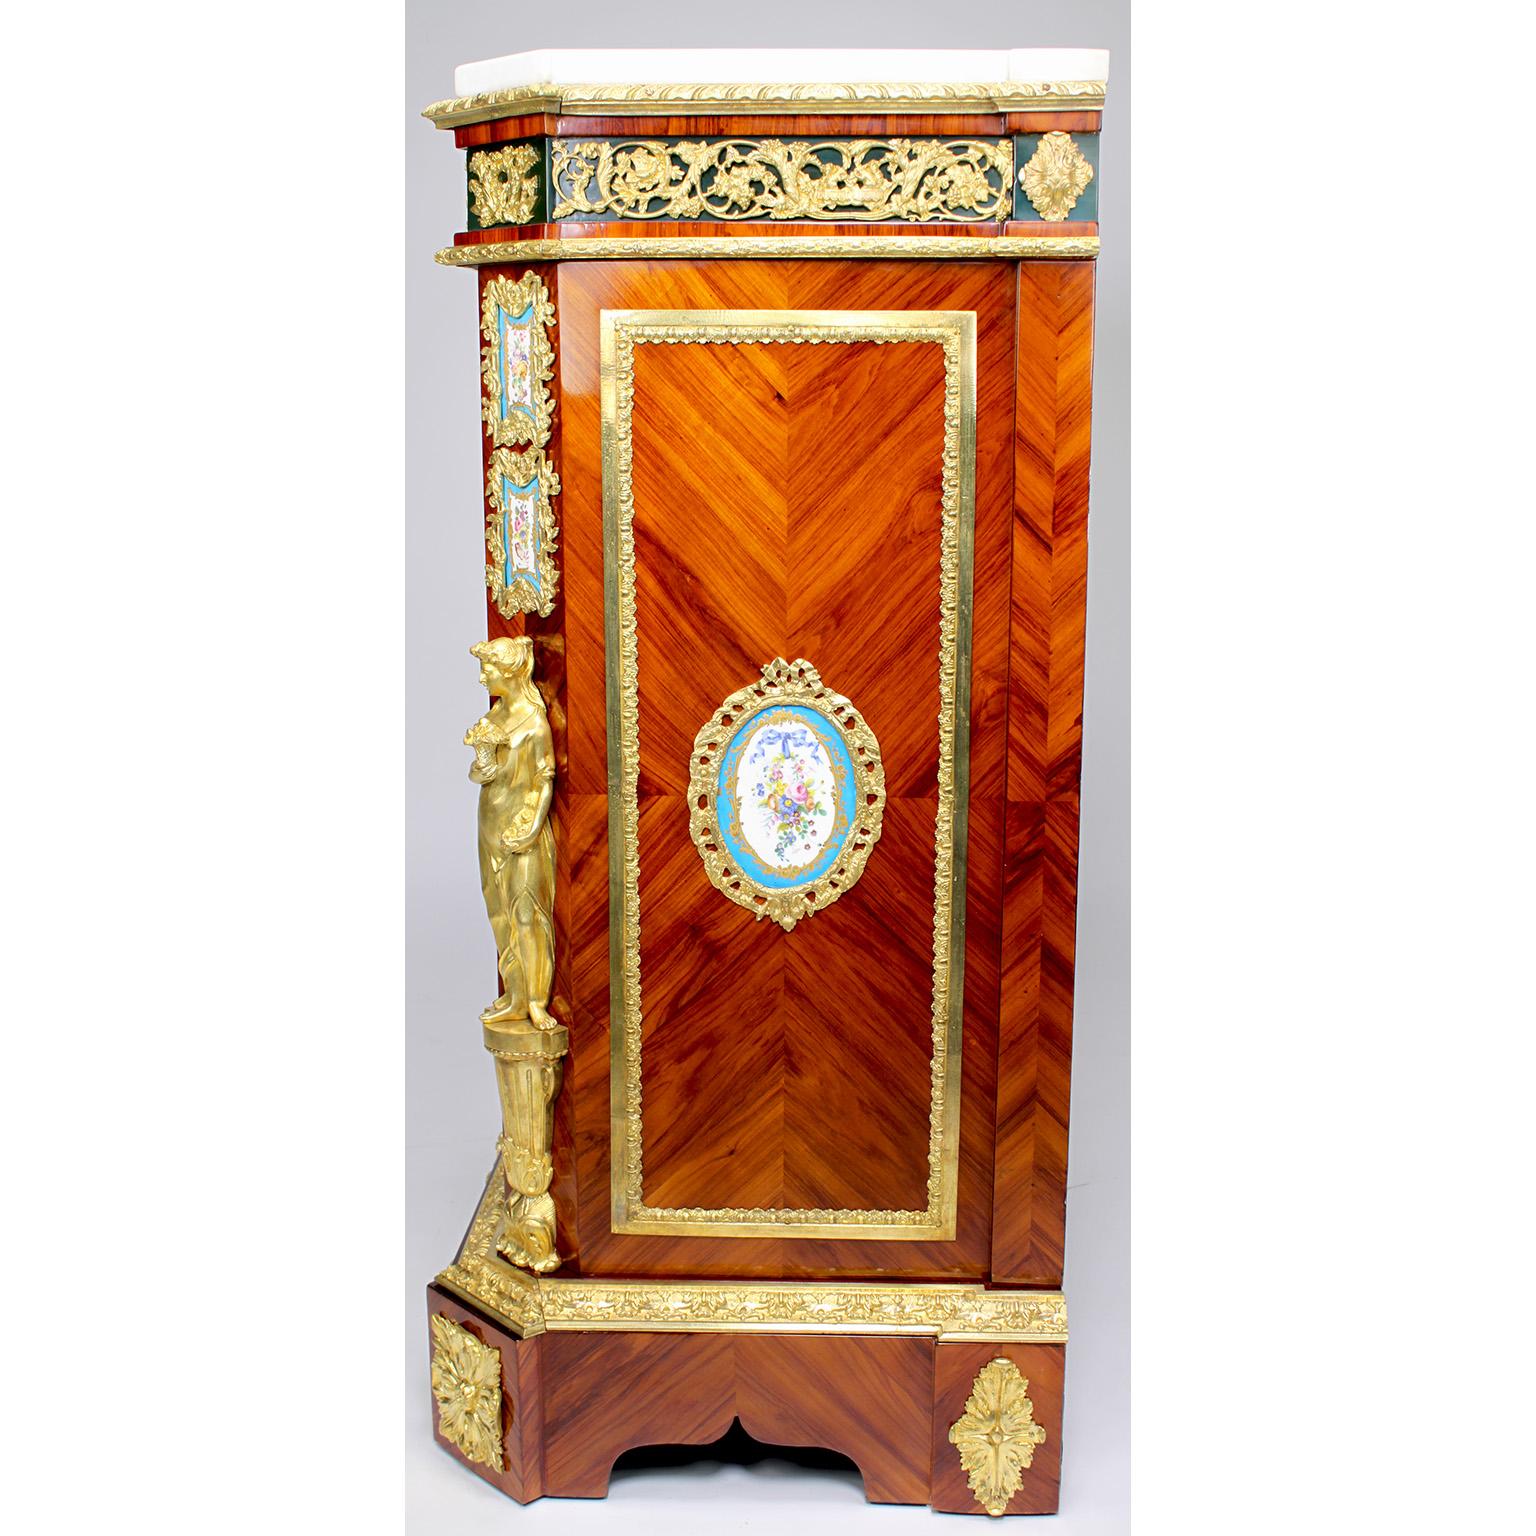 French Napoleon III Ormolu & Porcelain Mounted Cabinet Meuble D'Appui by Befort For Sale 4